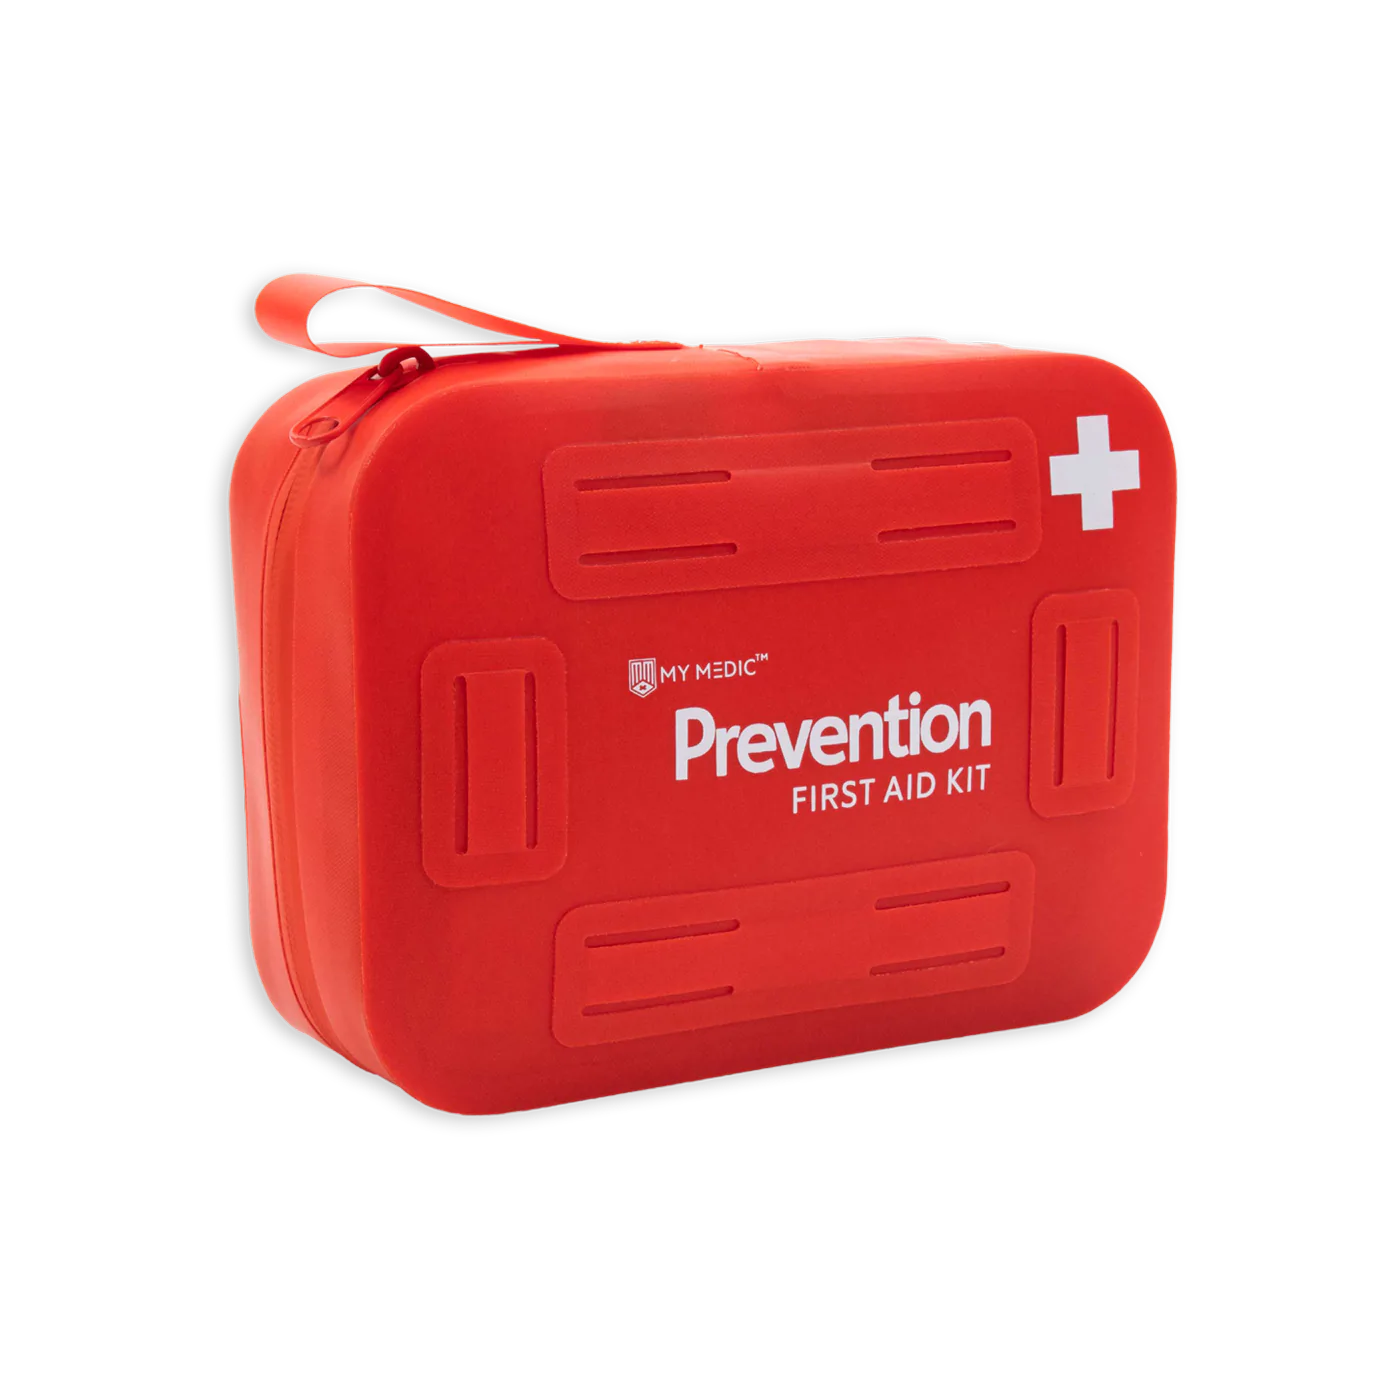 MY MEDIC PREVENTION FIRST AID KIT